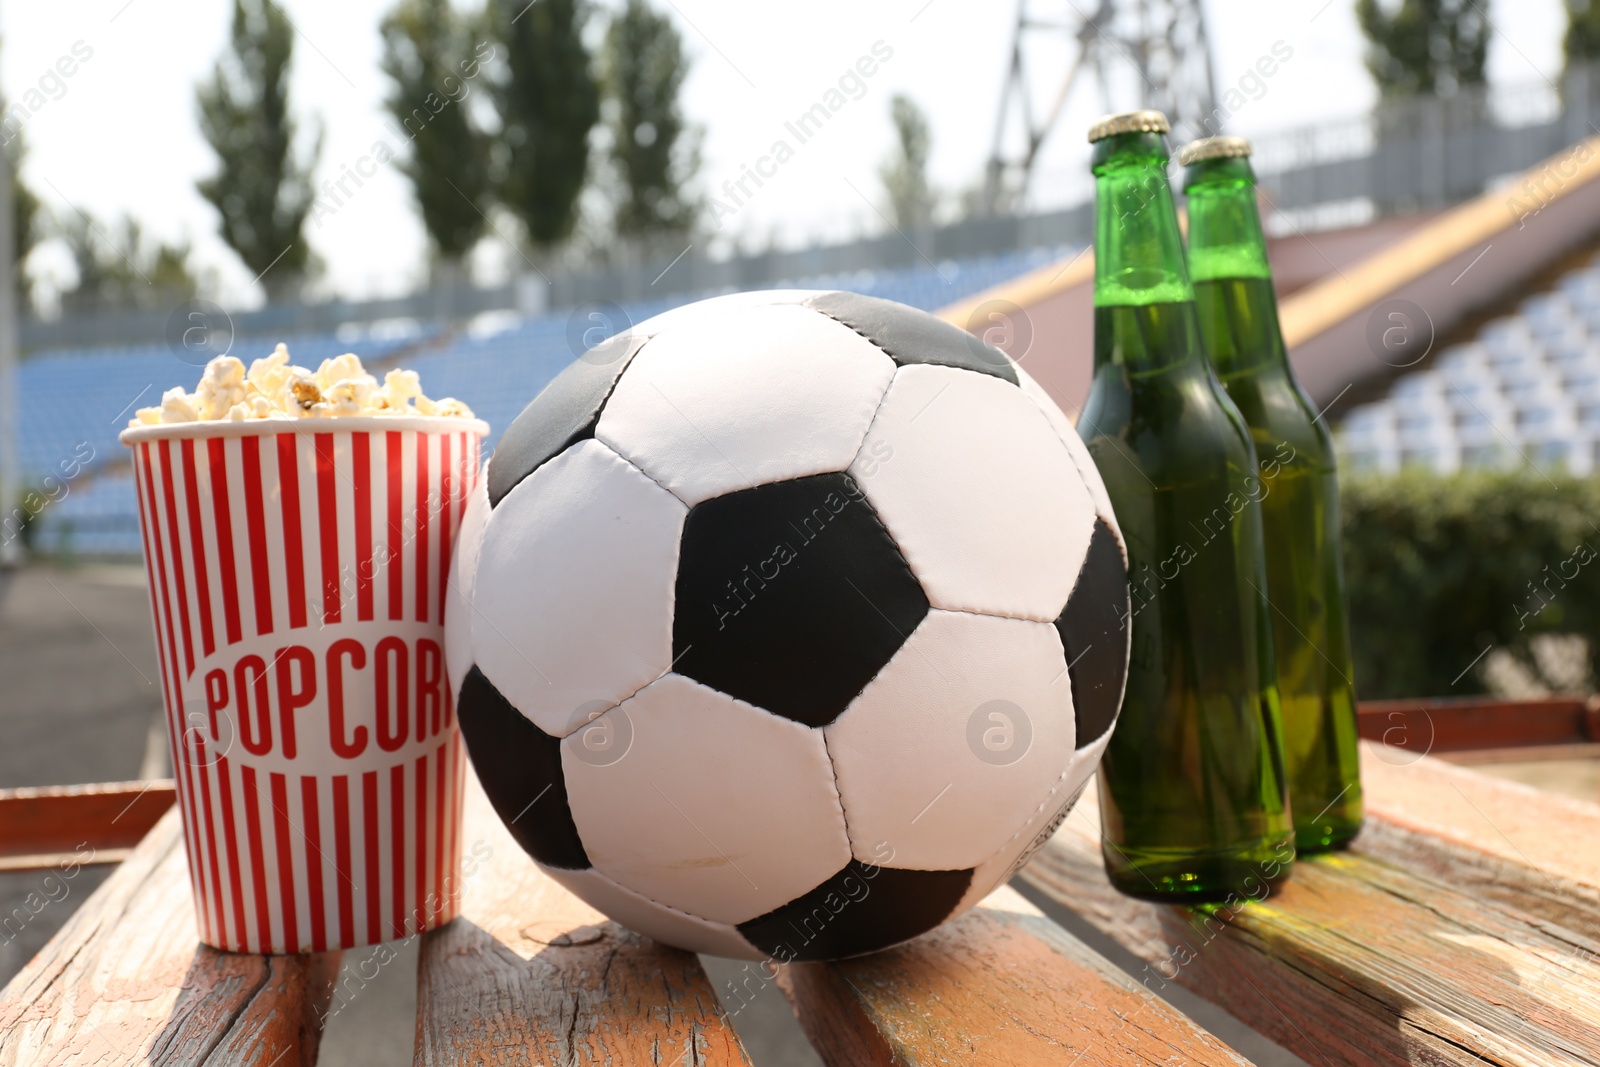 Photo of Football ball with beer and popcorn on wooden bench in stadium